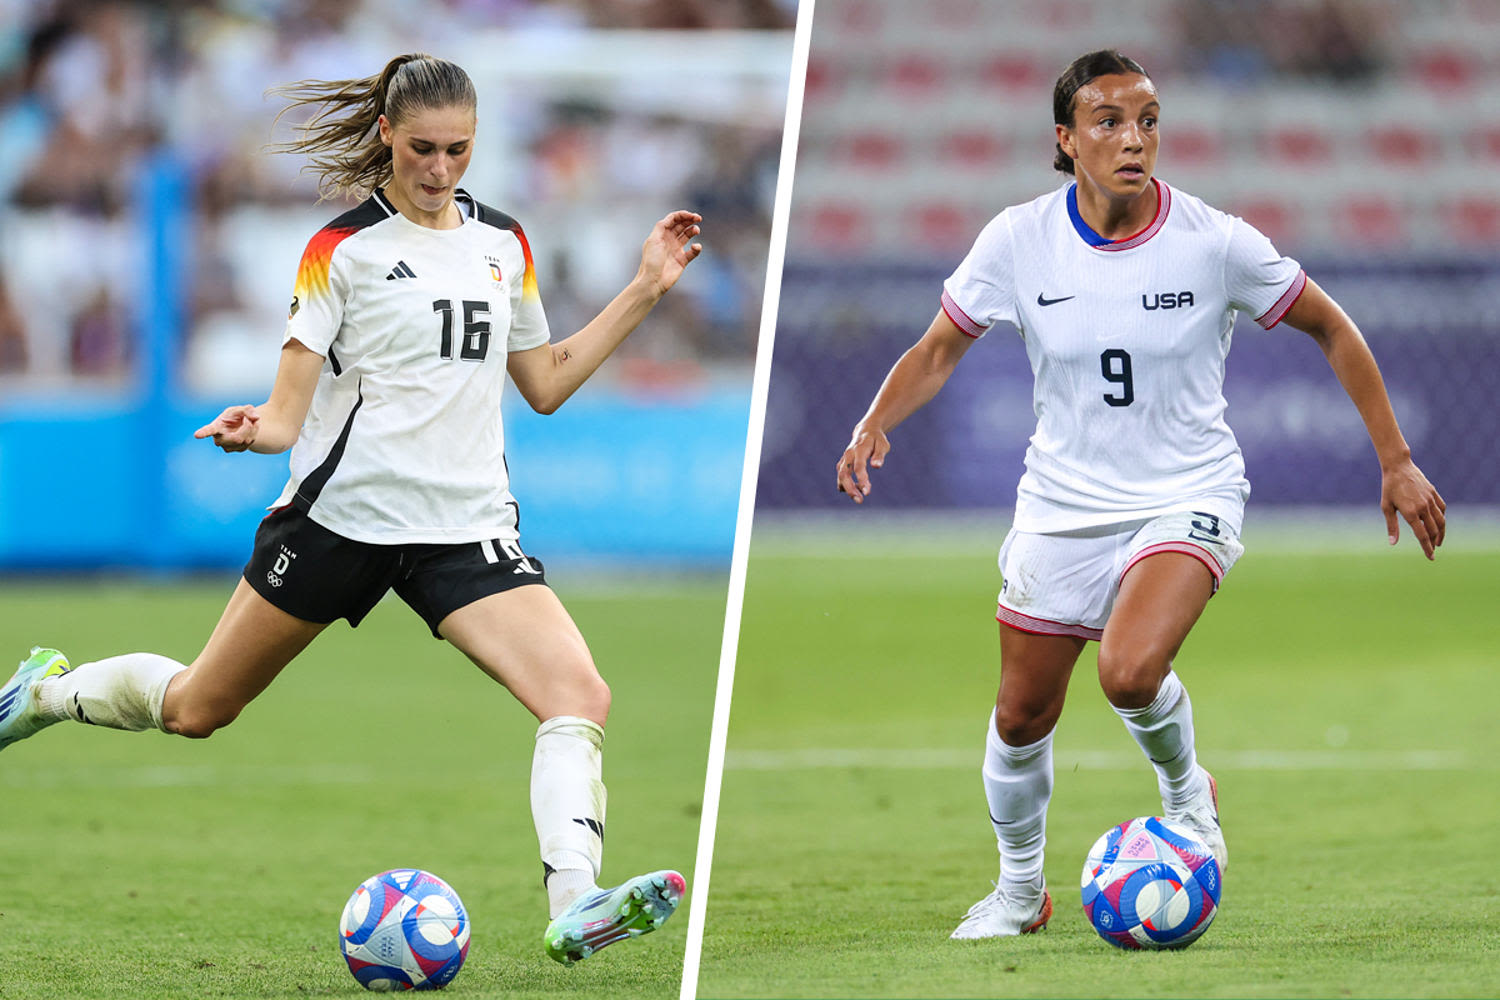 U.S. women’s soccer team leads group after 4-1 victory over Germany